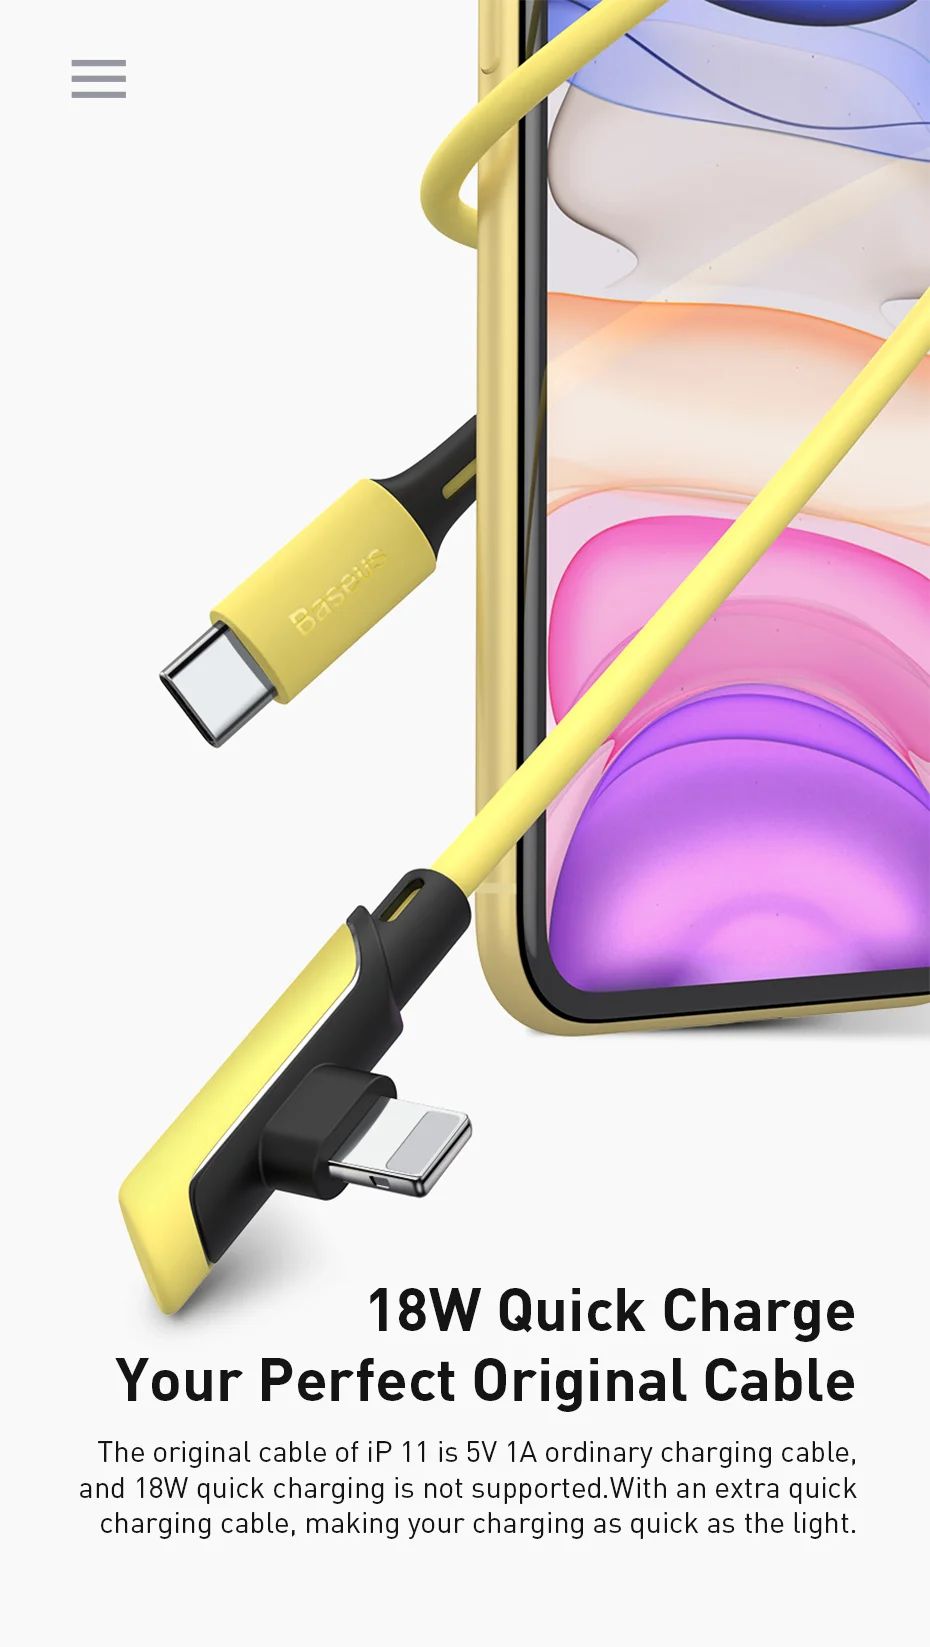 Baseus Elbow USB Type C Cable for iPhone Charger 18W USB C Fast Charging Data Cable for iPhone 11 Macbook PD Cable Type-C Wire